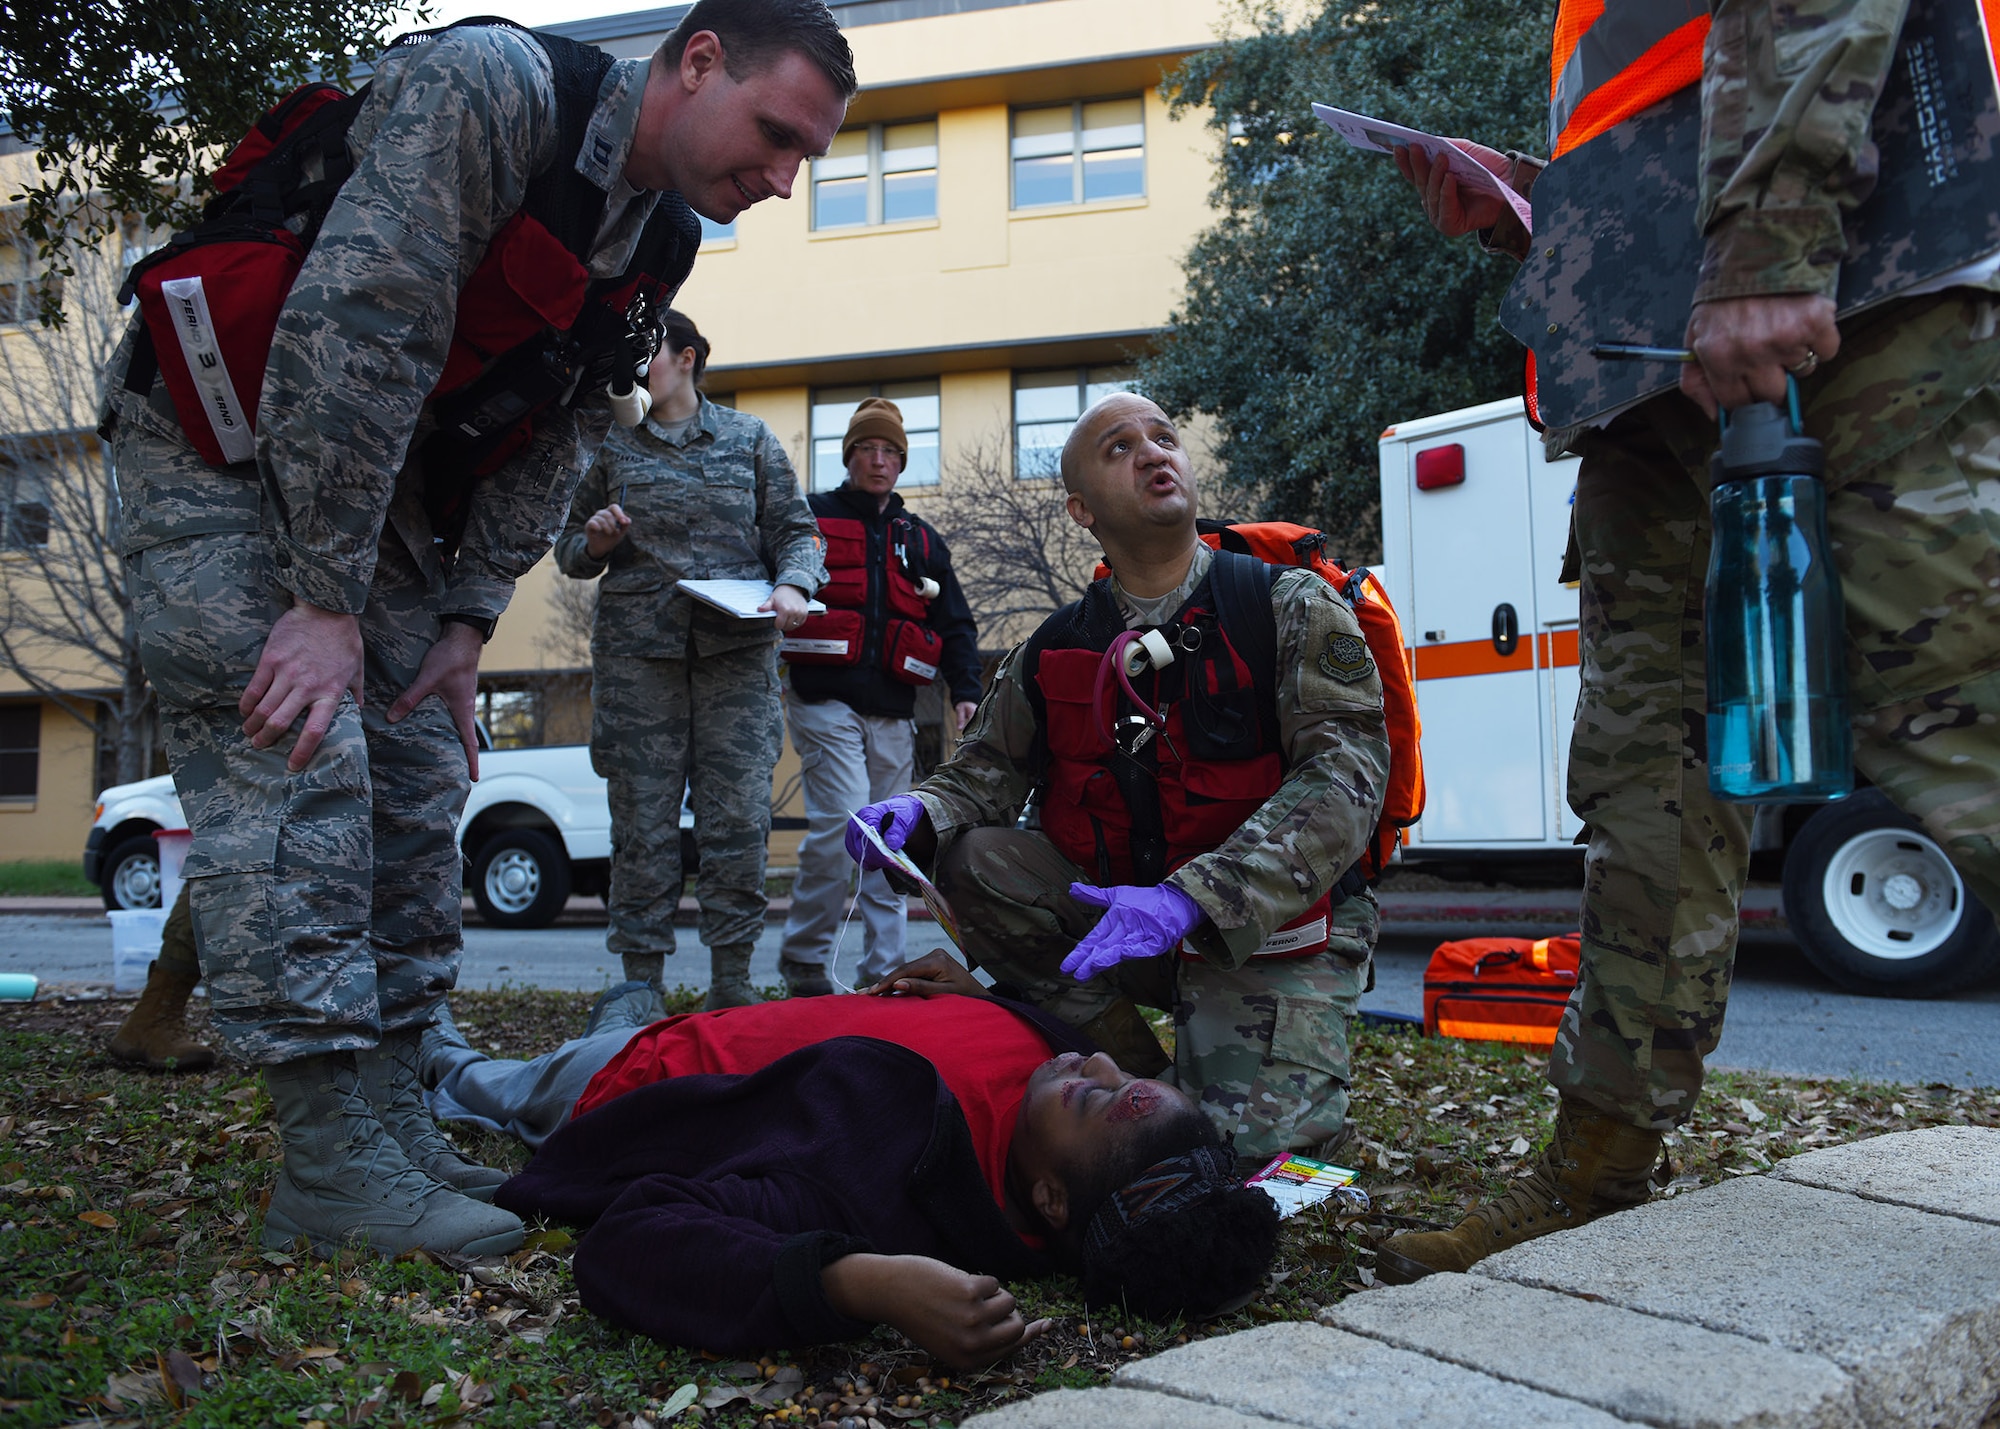 Airmen assigned to the 7th Operational Medical Readiness Squadron diagnose a simulated patient’s status during the 7th Medical Group’s chemical, biological, radiological, and nuclear exercise at Dyess Air Force Base, Texas, March 6, 2020.